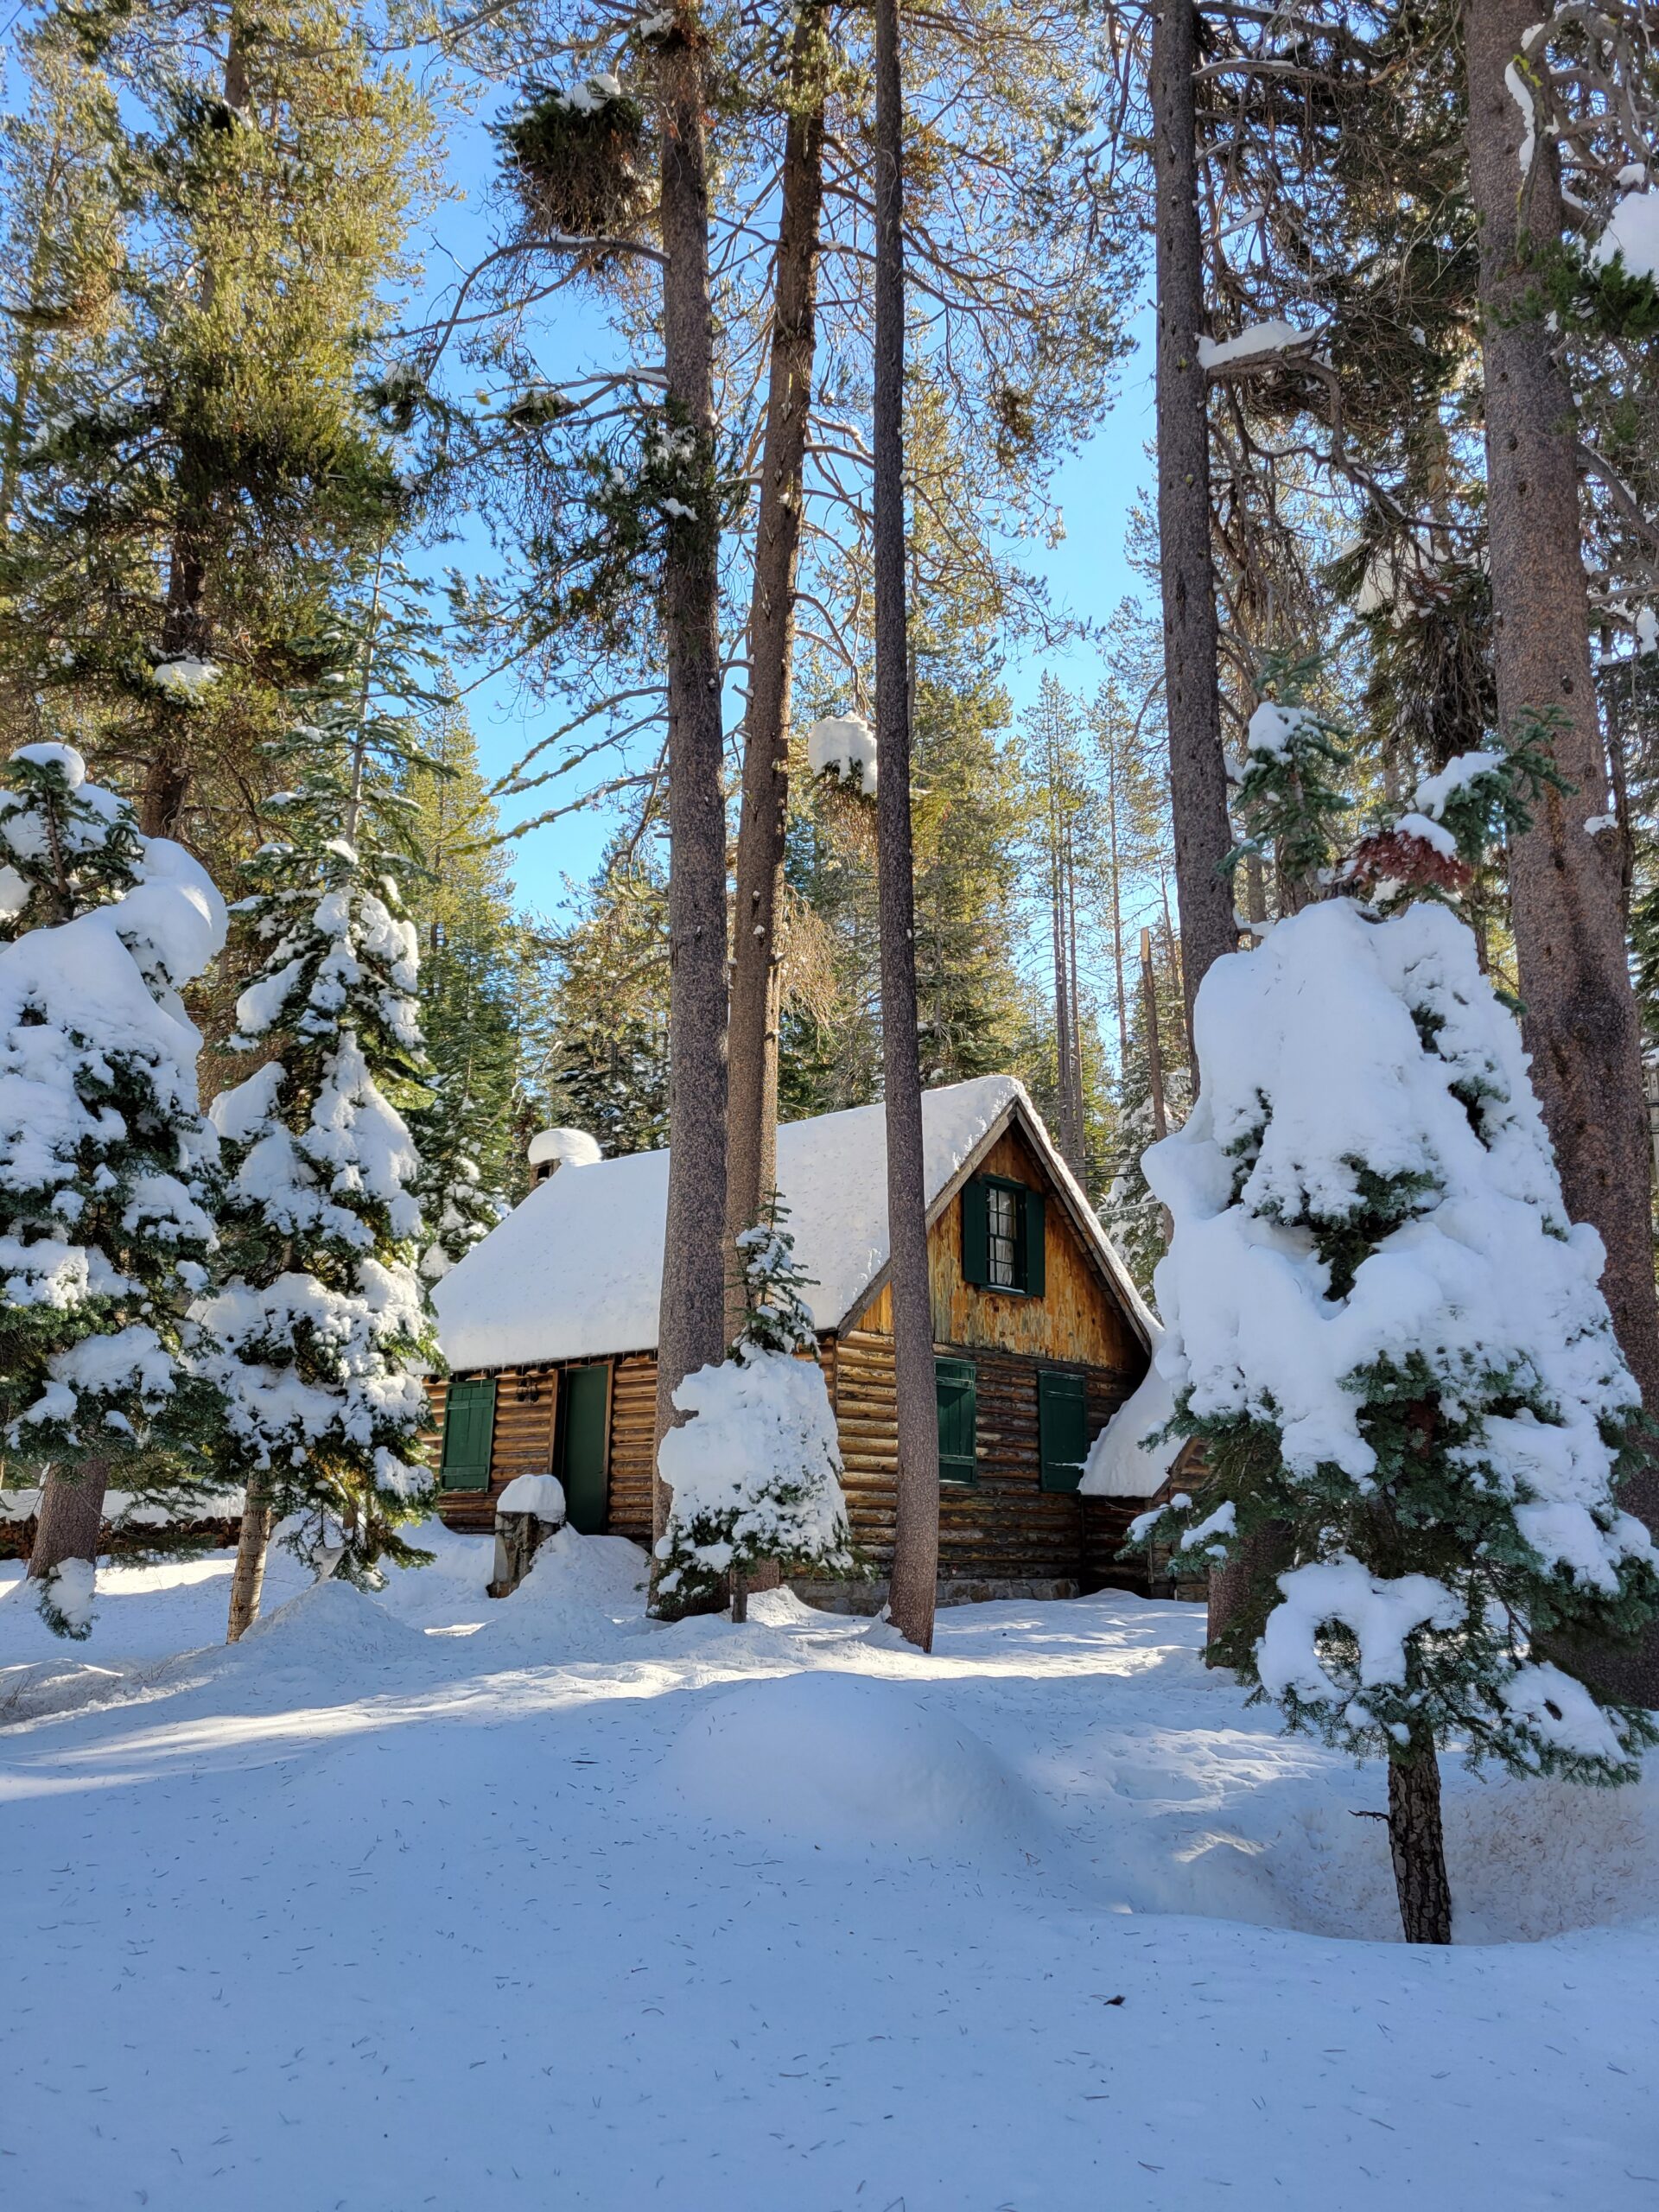 cabin located in a forest with snow